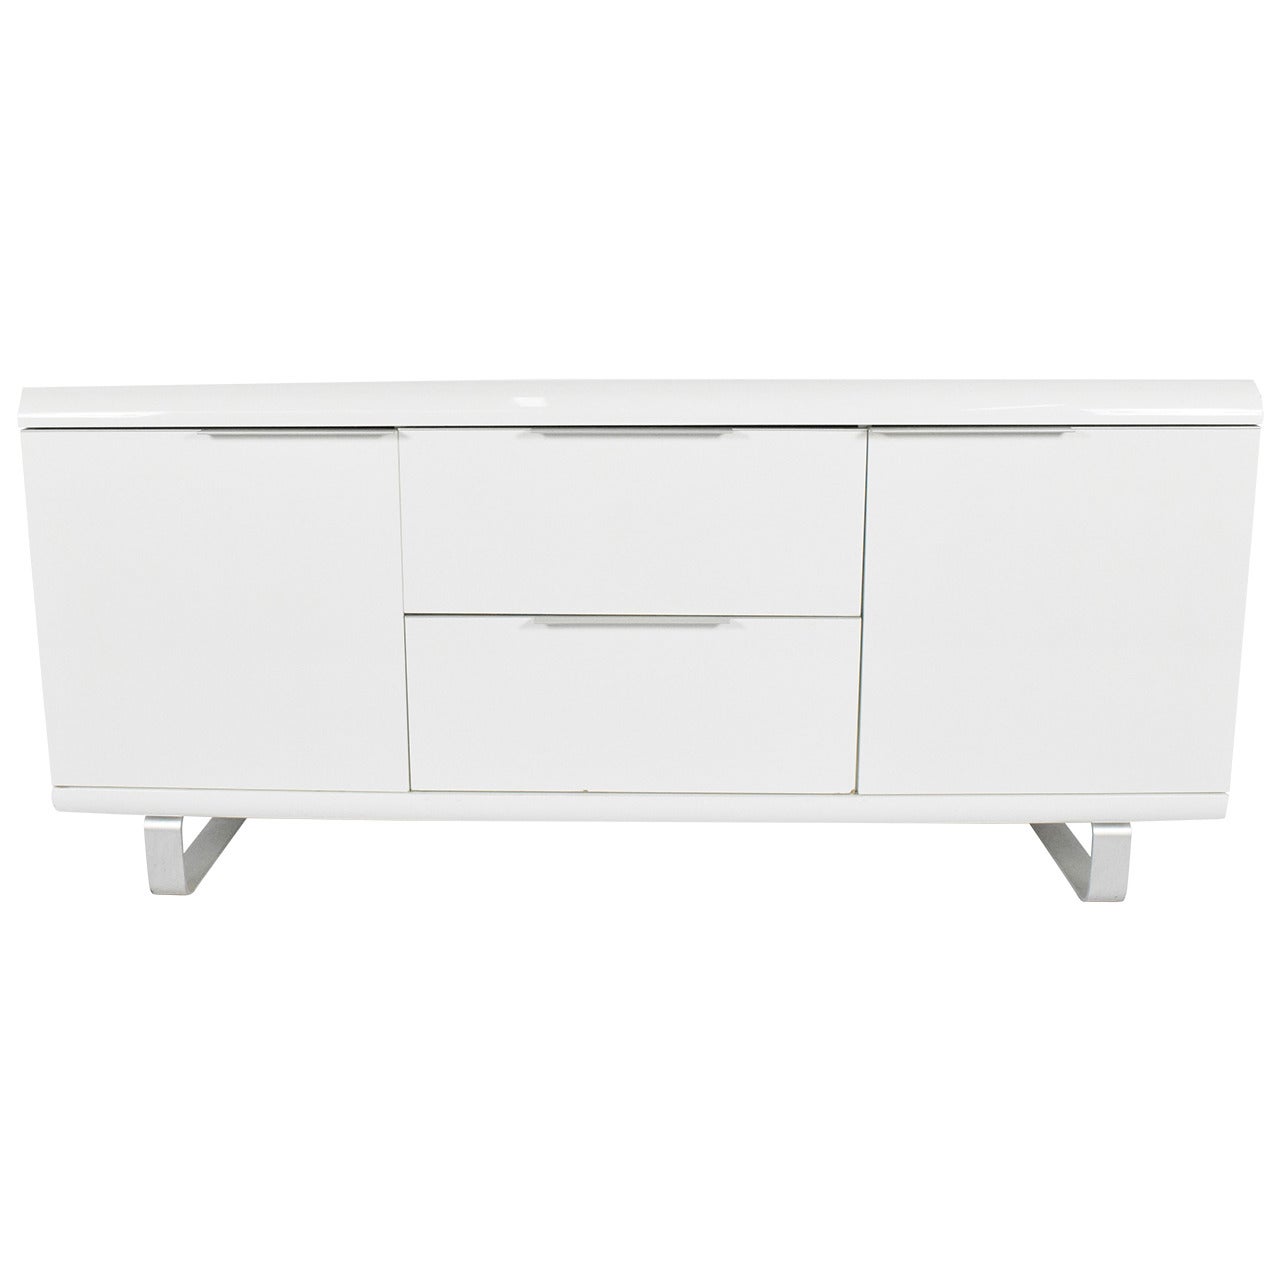 Saporiti Sideboard in White Lacquer with Chrome Legs